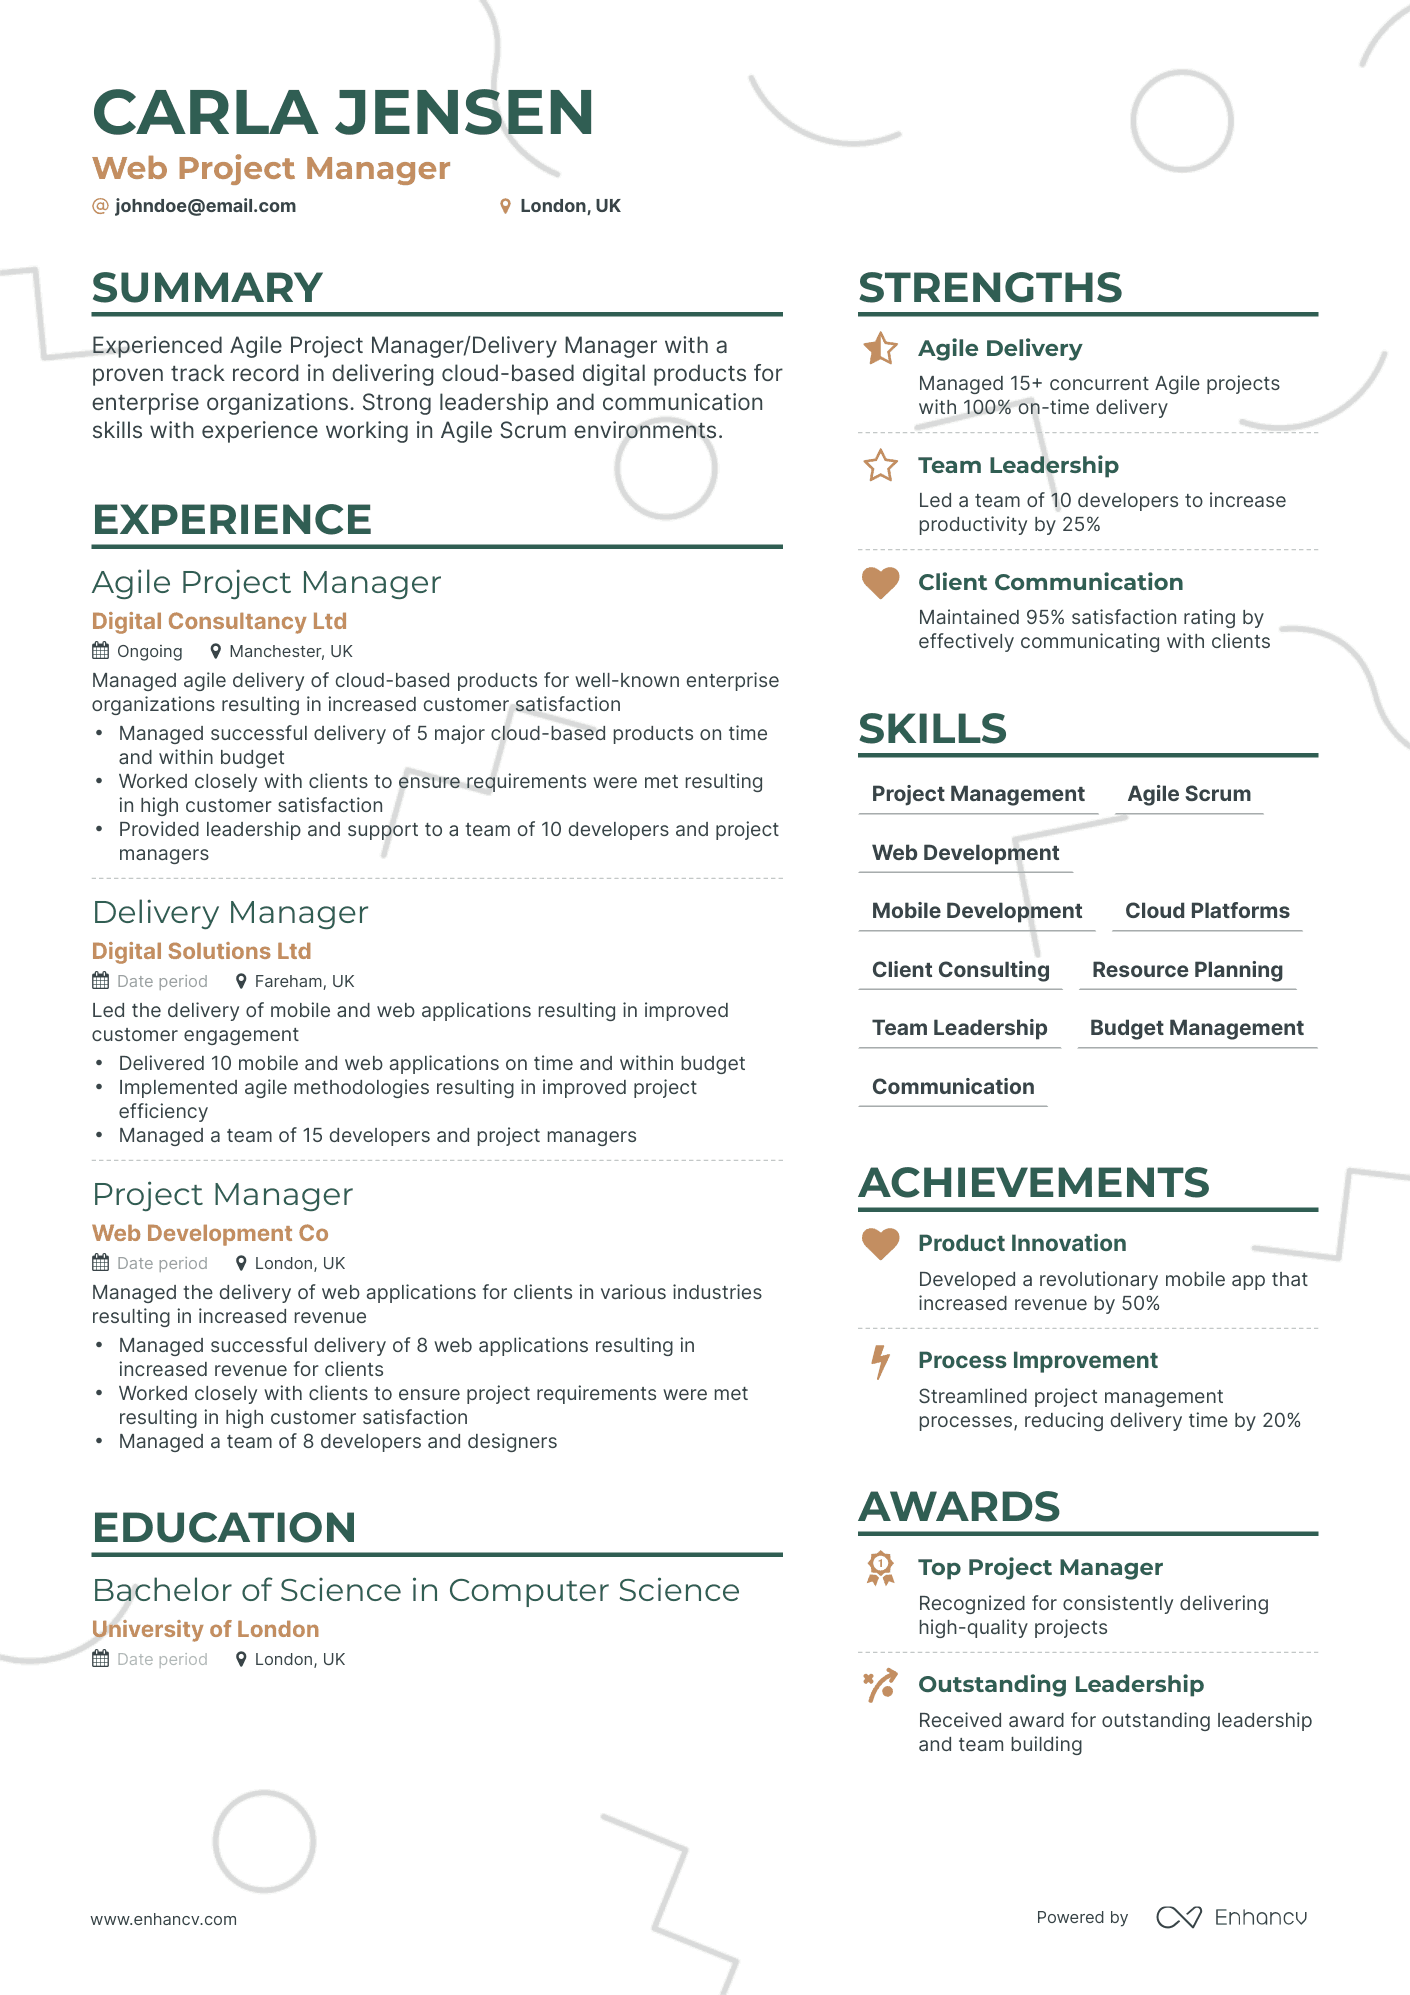 Web Project Manager Resume Example